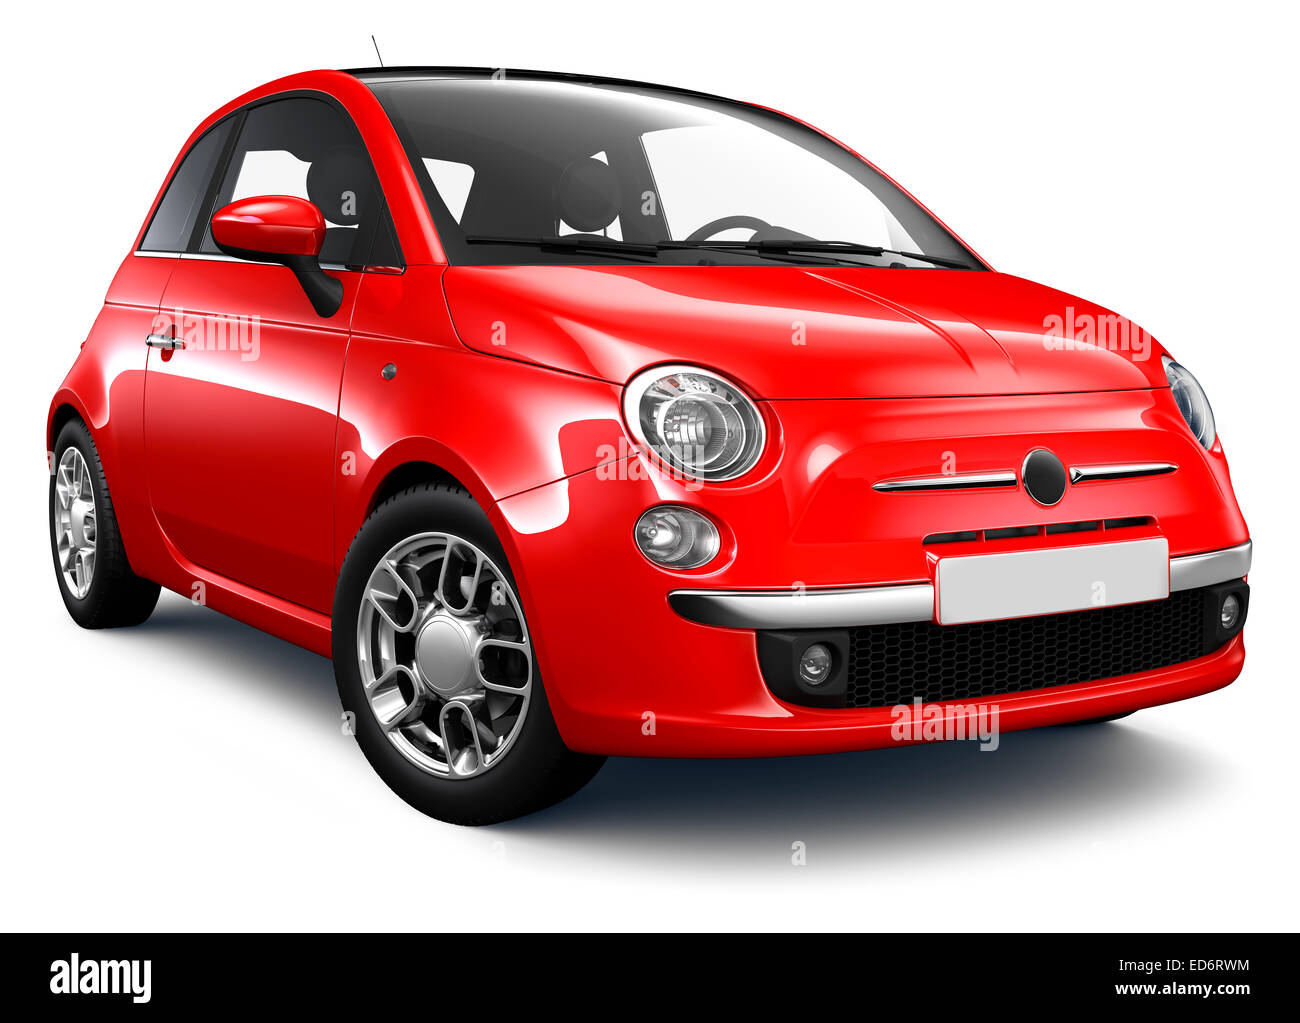 Small red car on white background Stock Photo